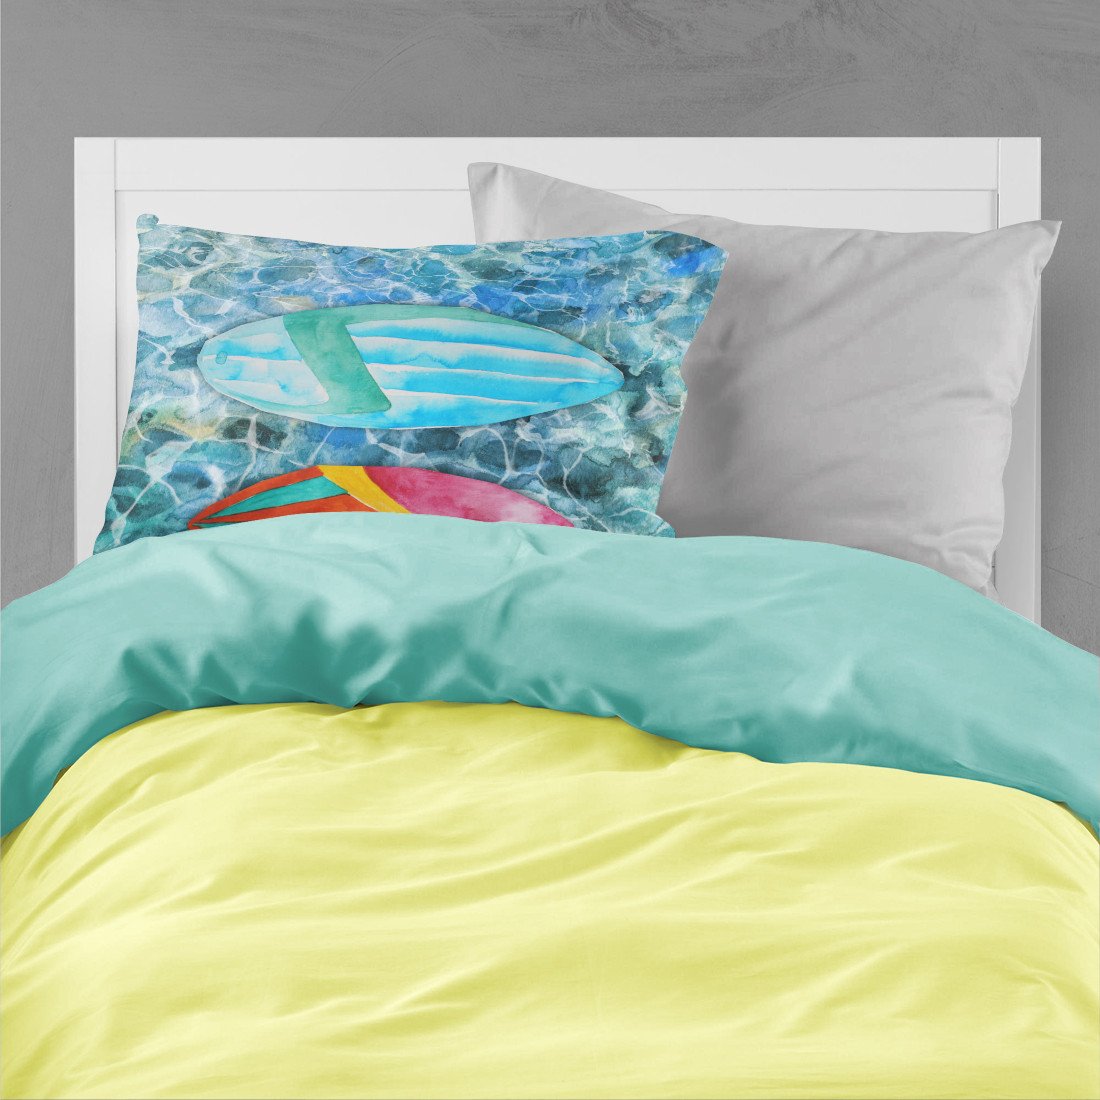 Surf Boards on the Water Fabric Standard Pillowcase BB5366PILLOWCASE by Caroline's Treasures